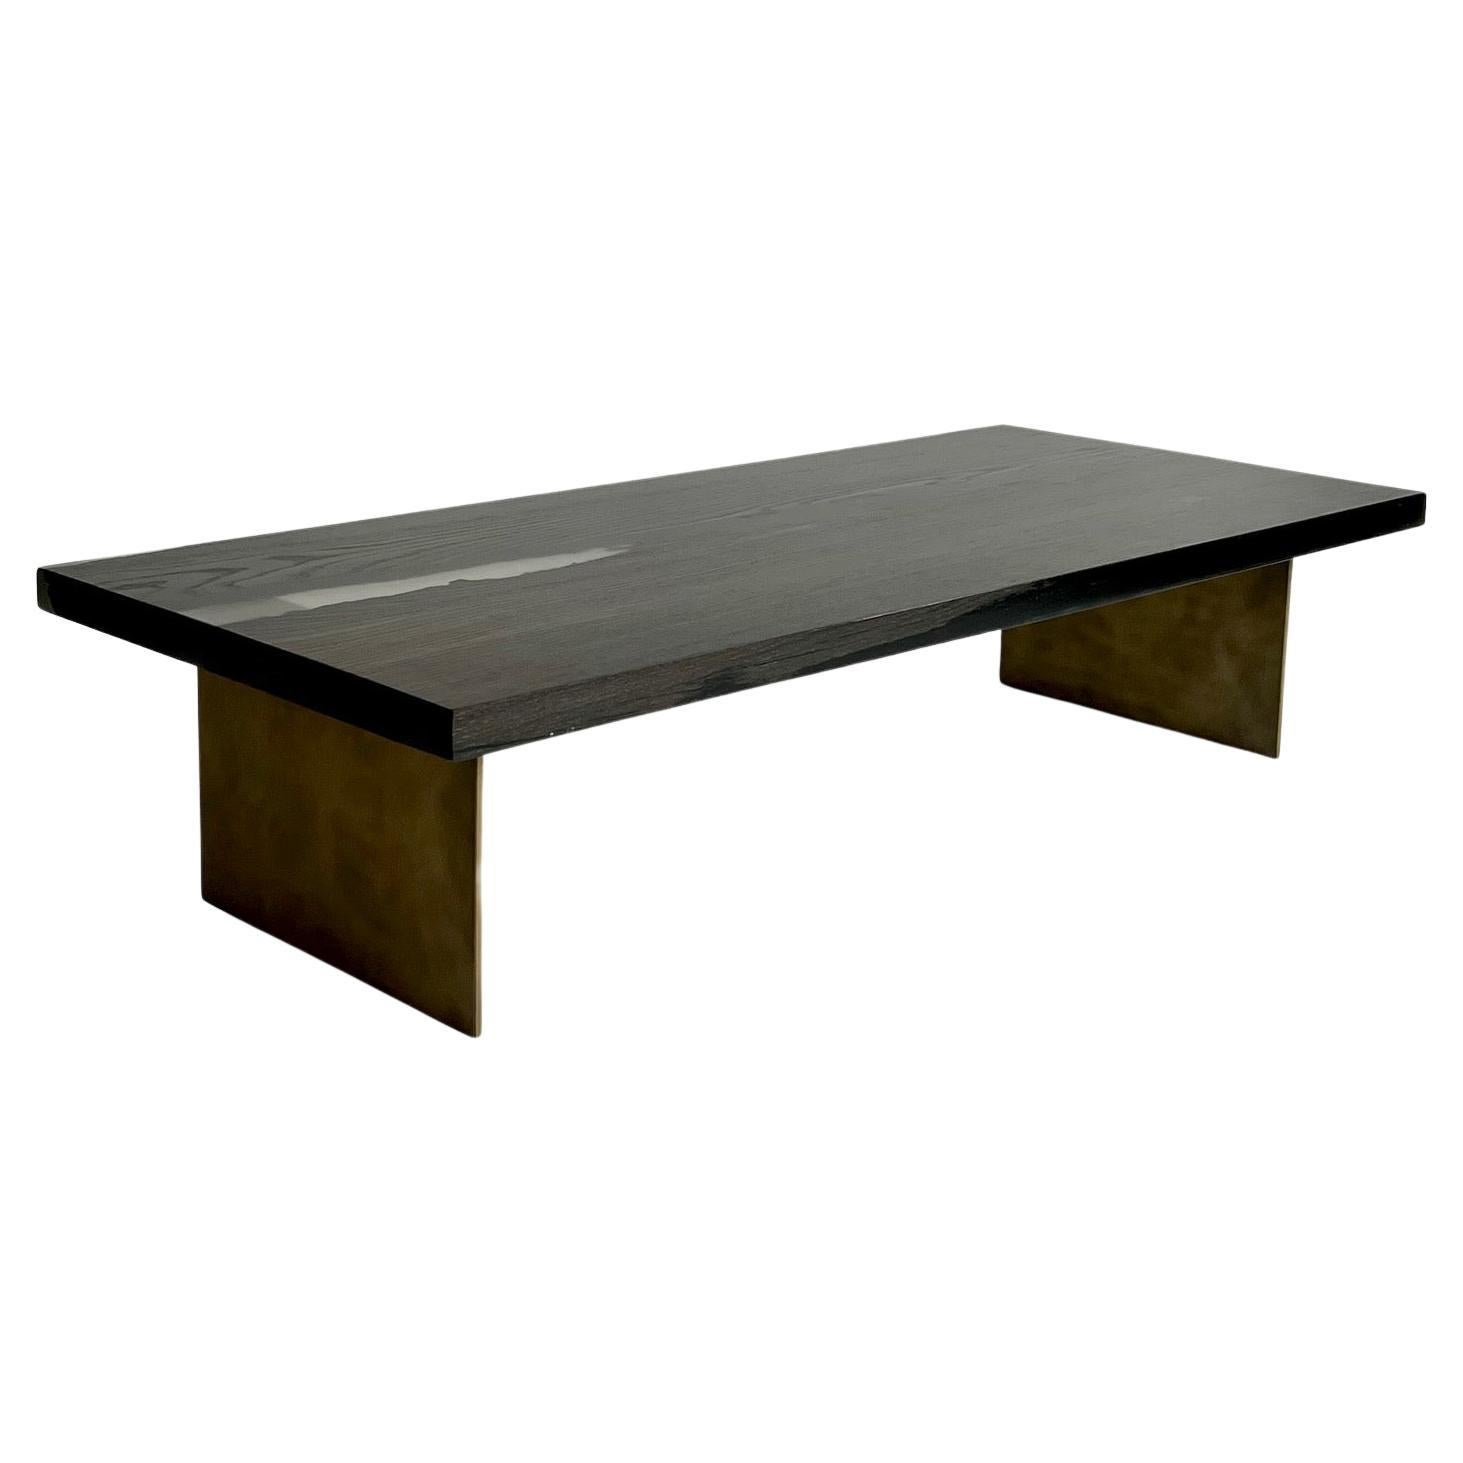 Handcrafted rectangular coffee table